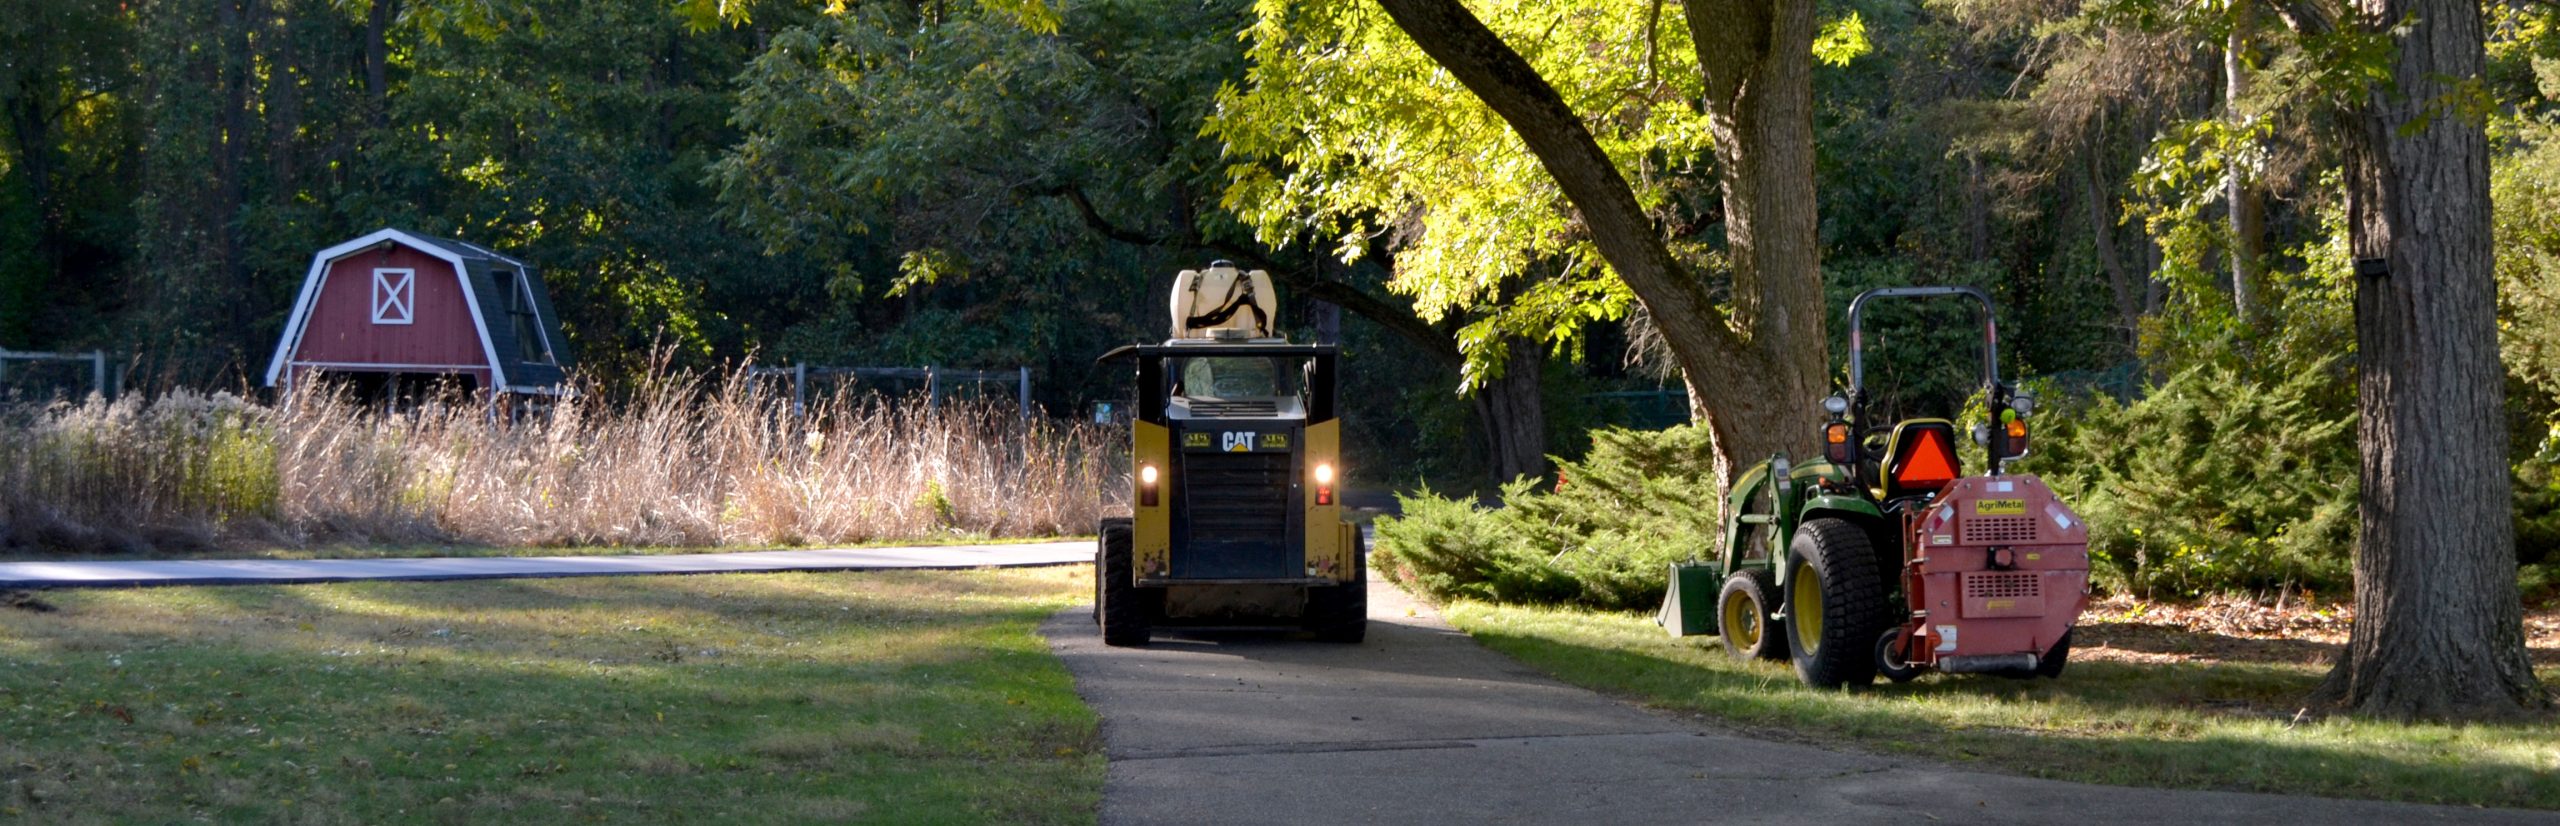 Heavy equipment sits on the Bird Sanctuary’s Paved Path, with the resident Barn Owl’s enclosure in the background.